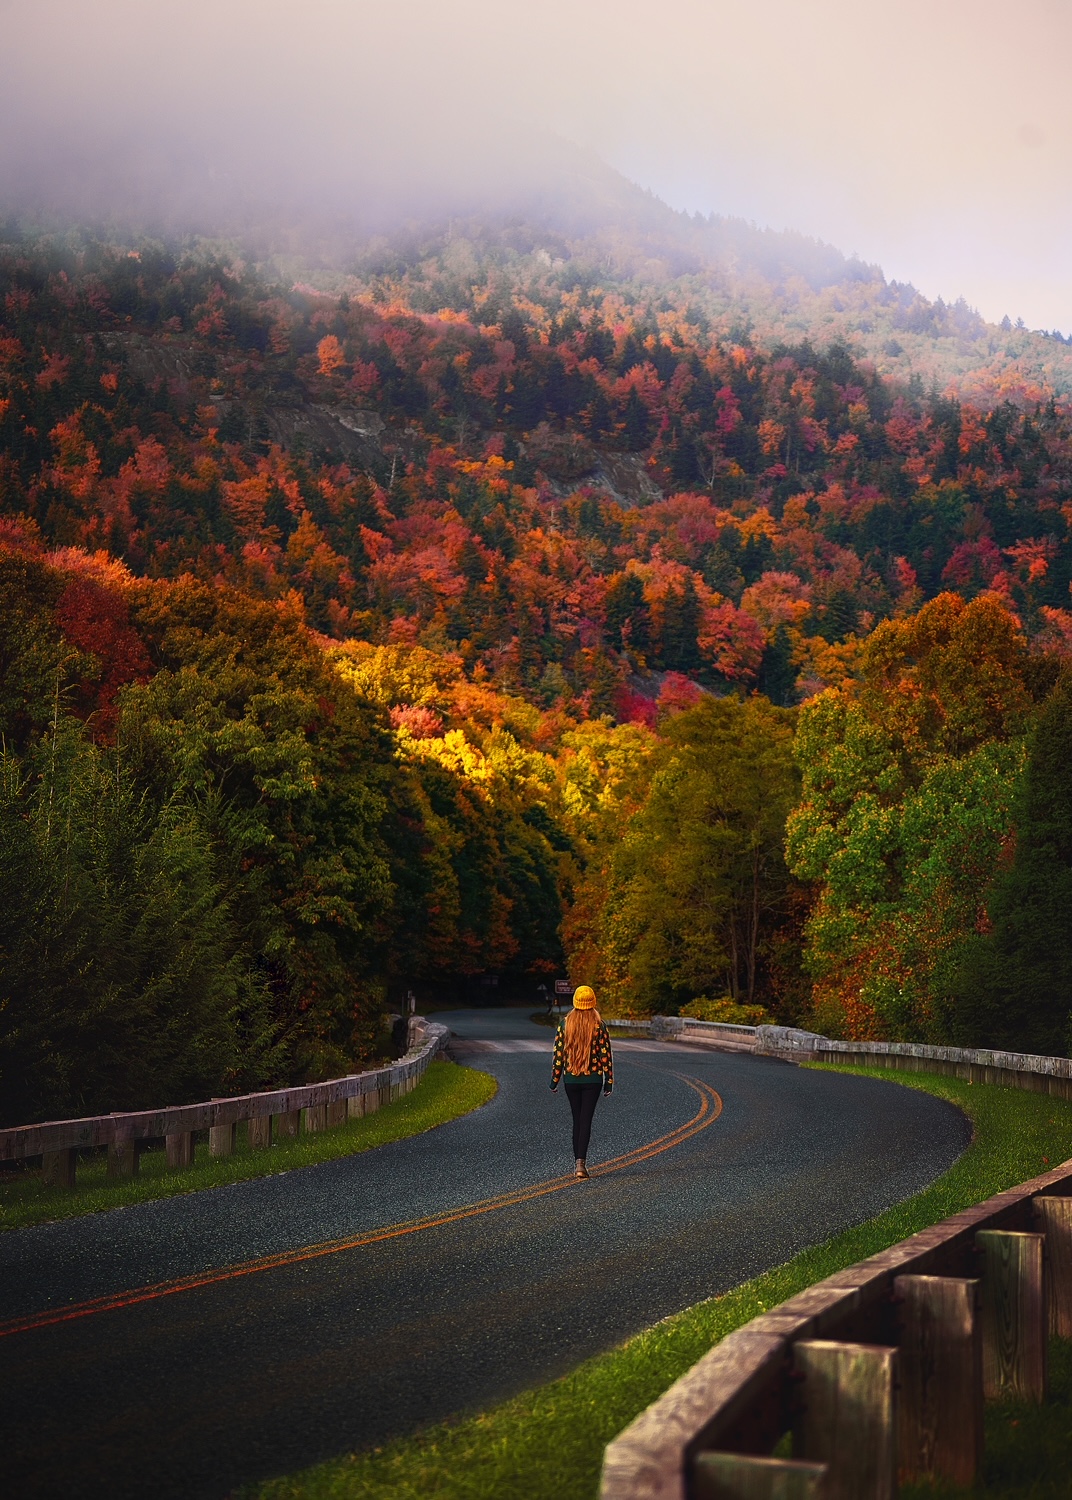 Woman in a sweater walks along a road under a mountain with colorful fall foliage in the USA.